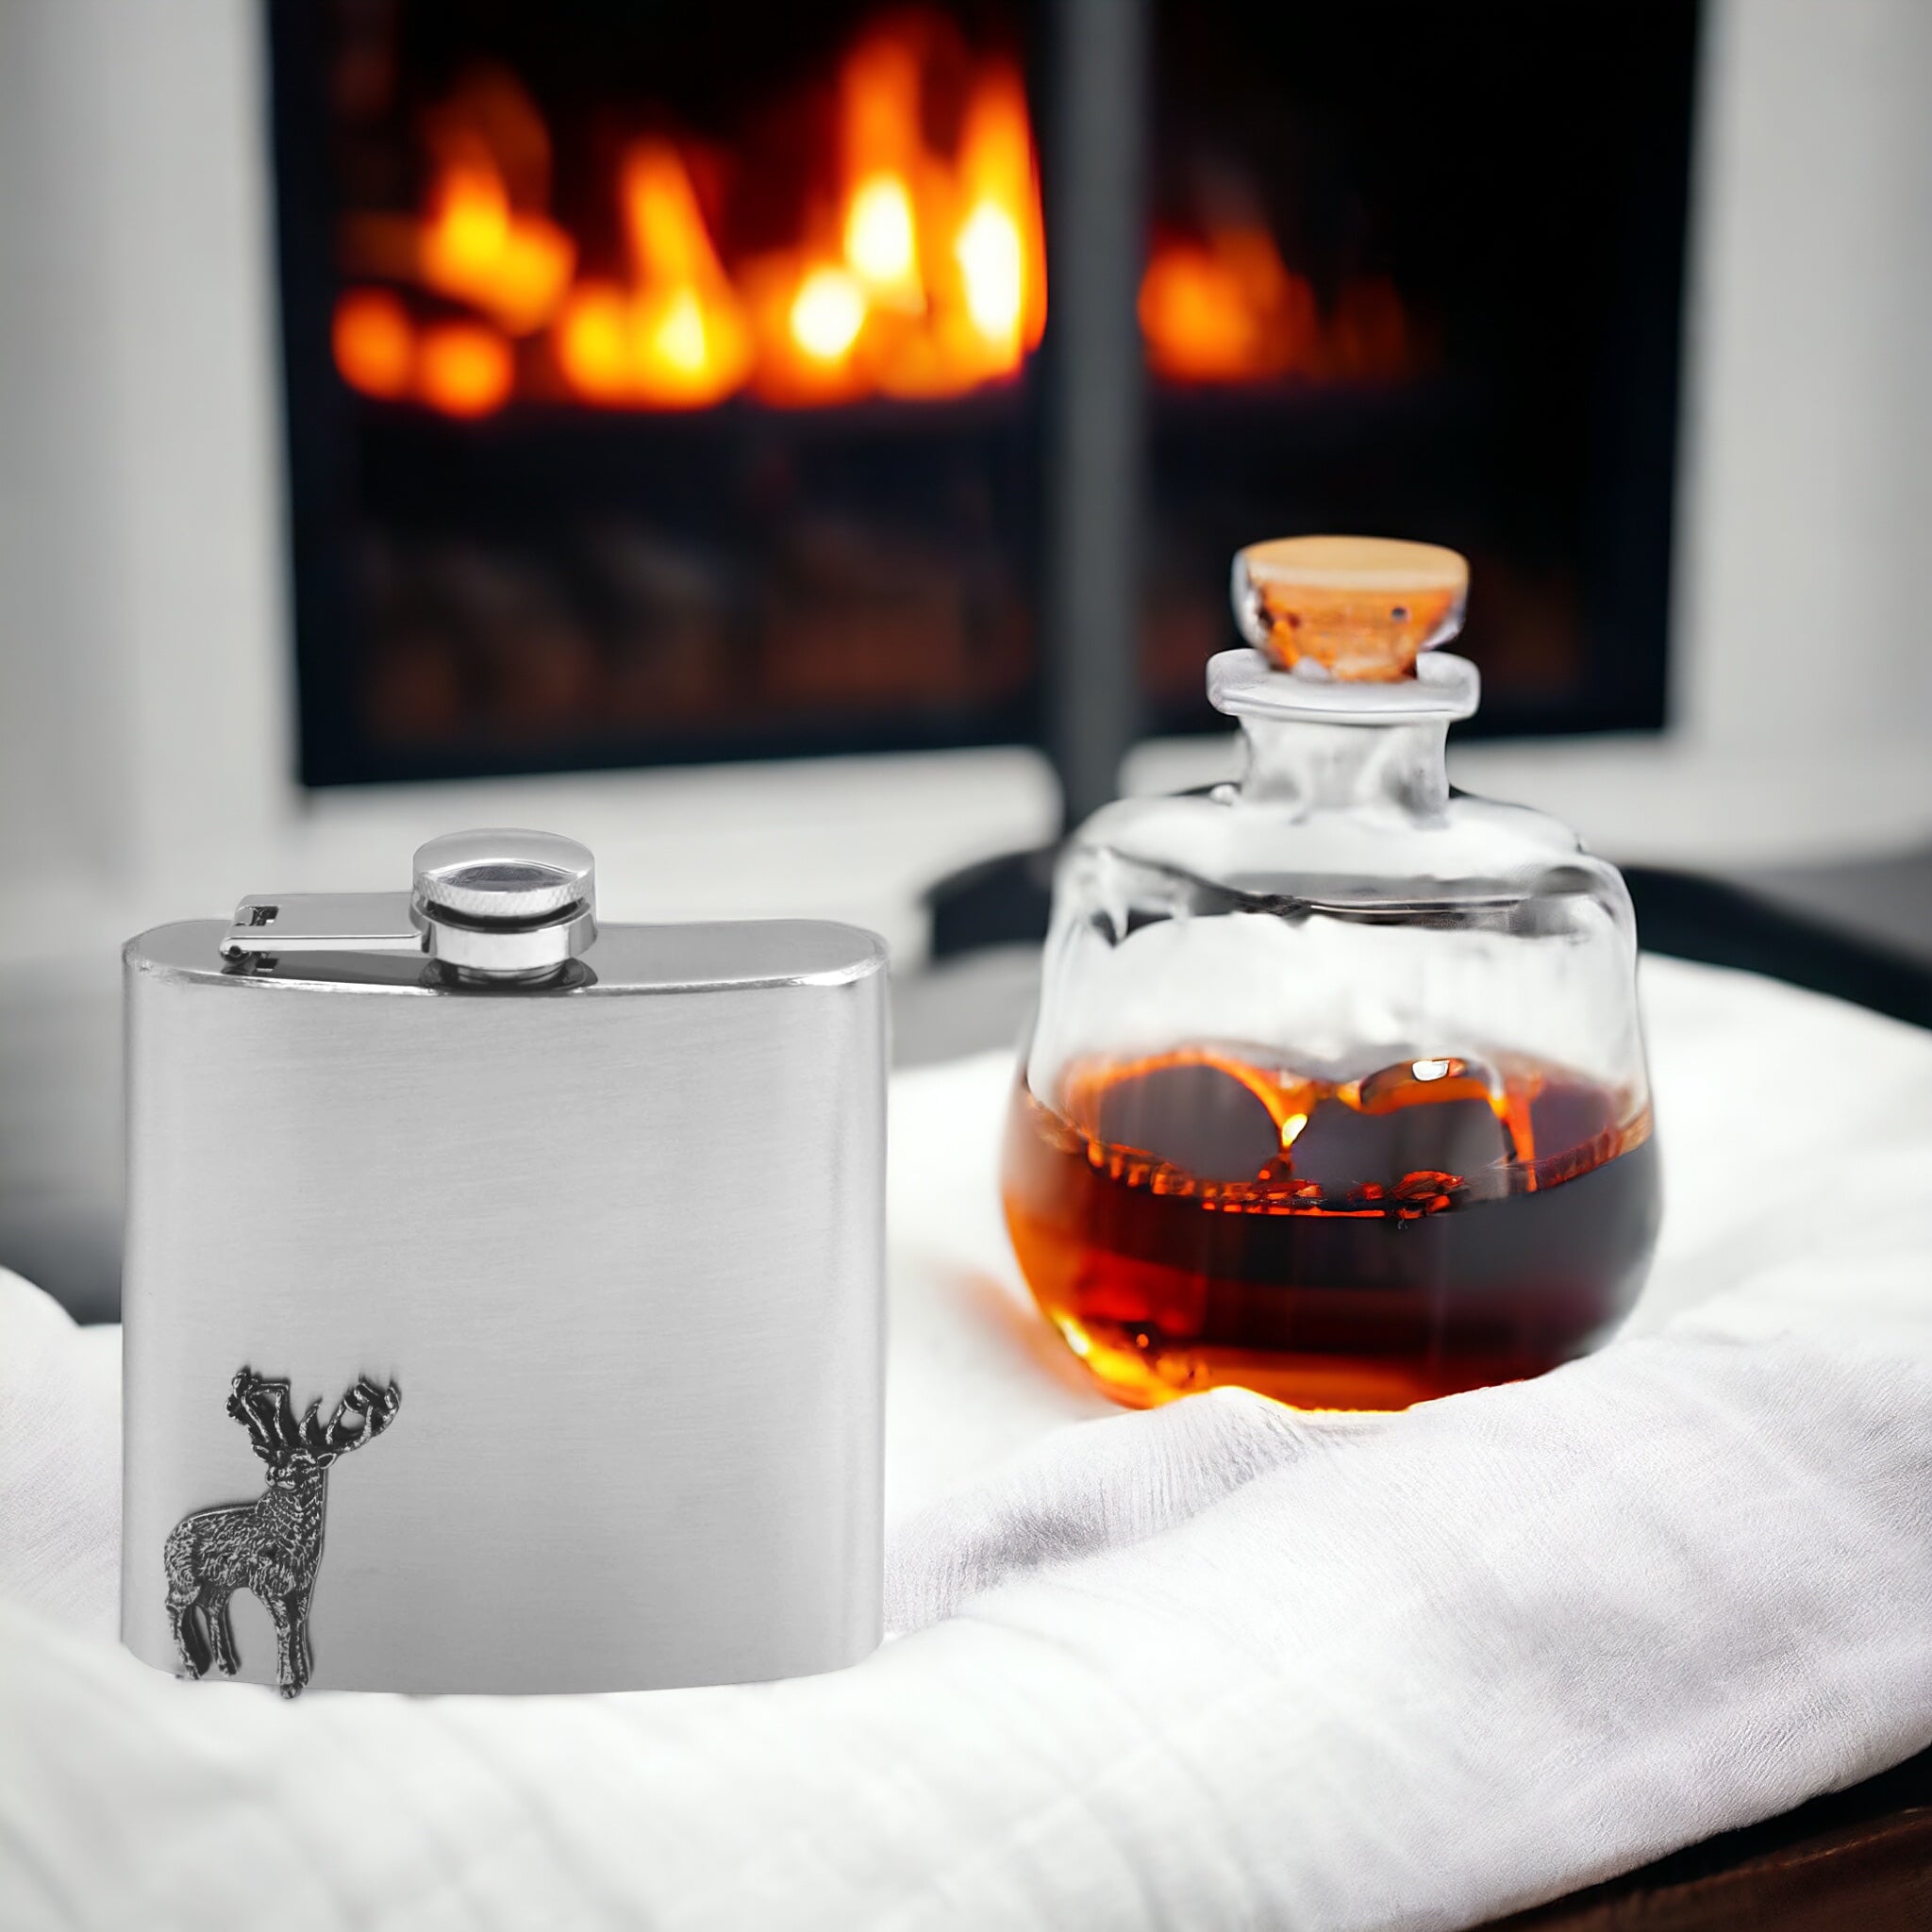 6oz pewter hip flask with stag emblem